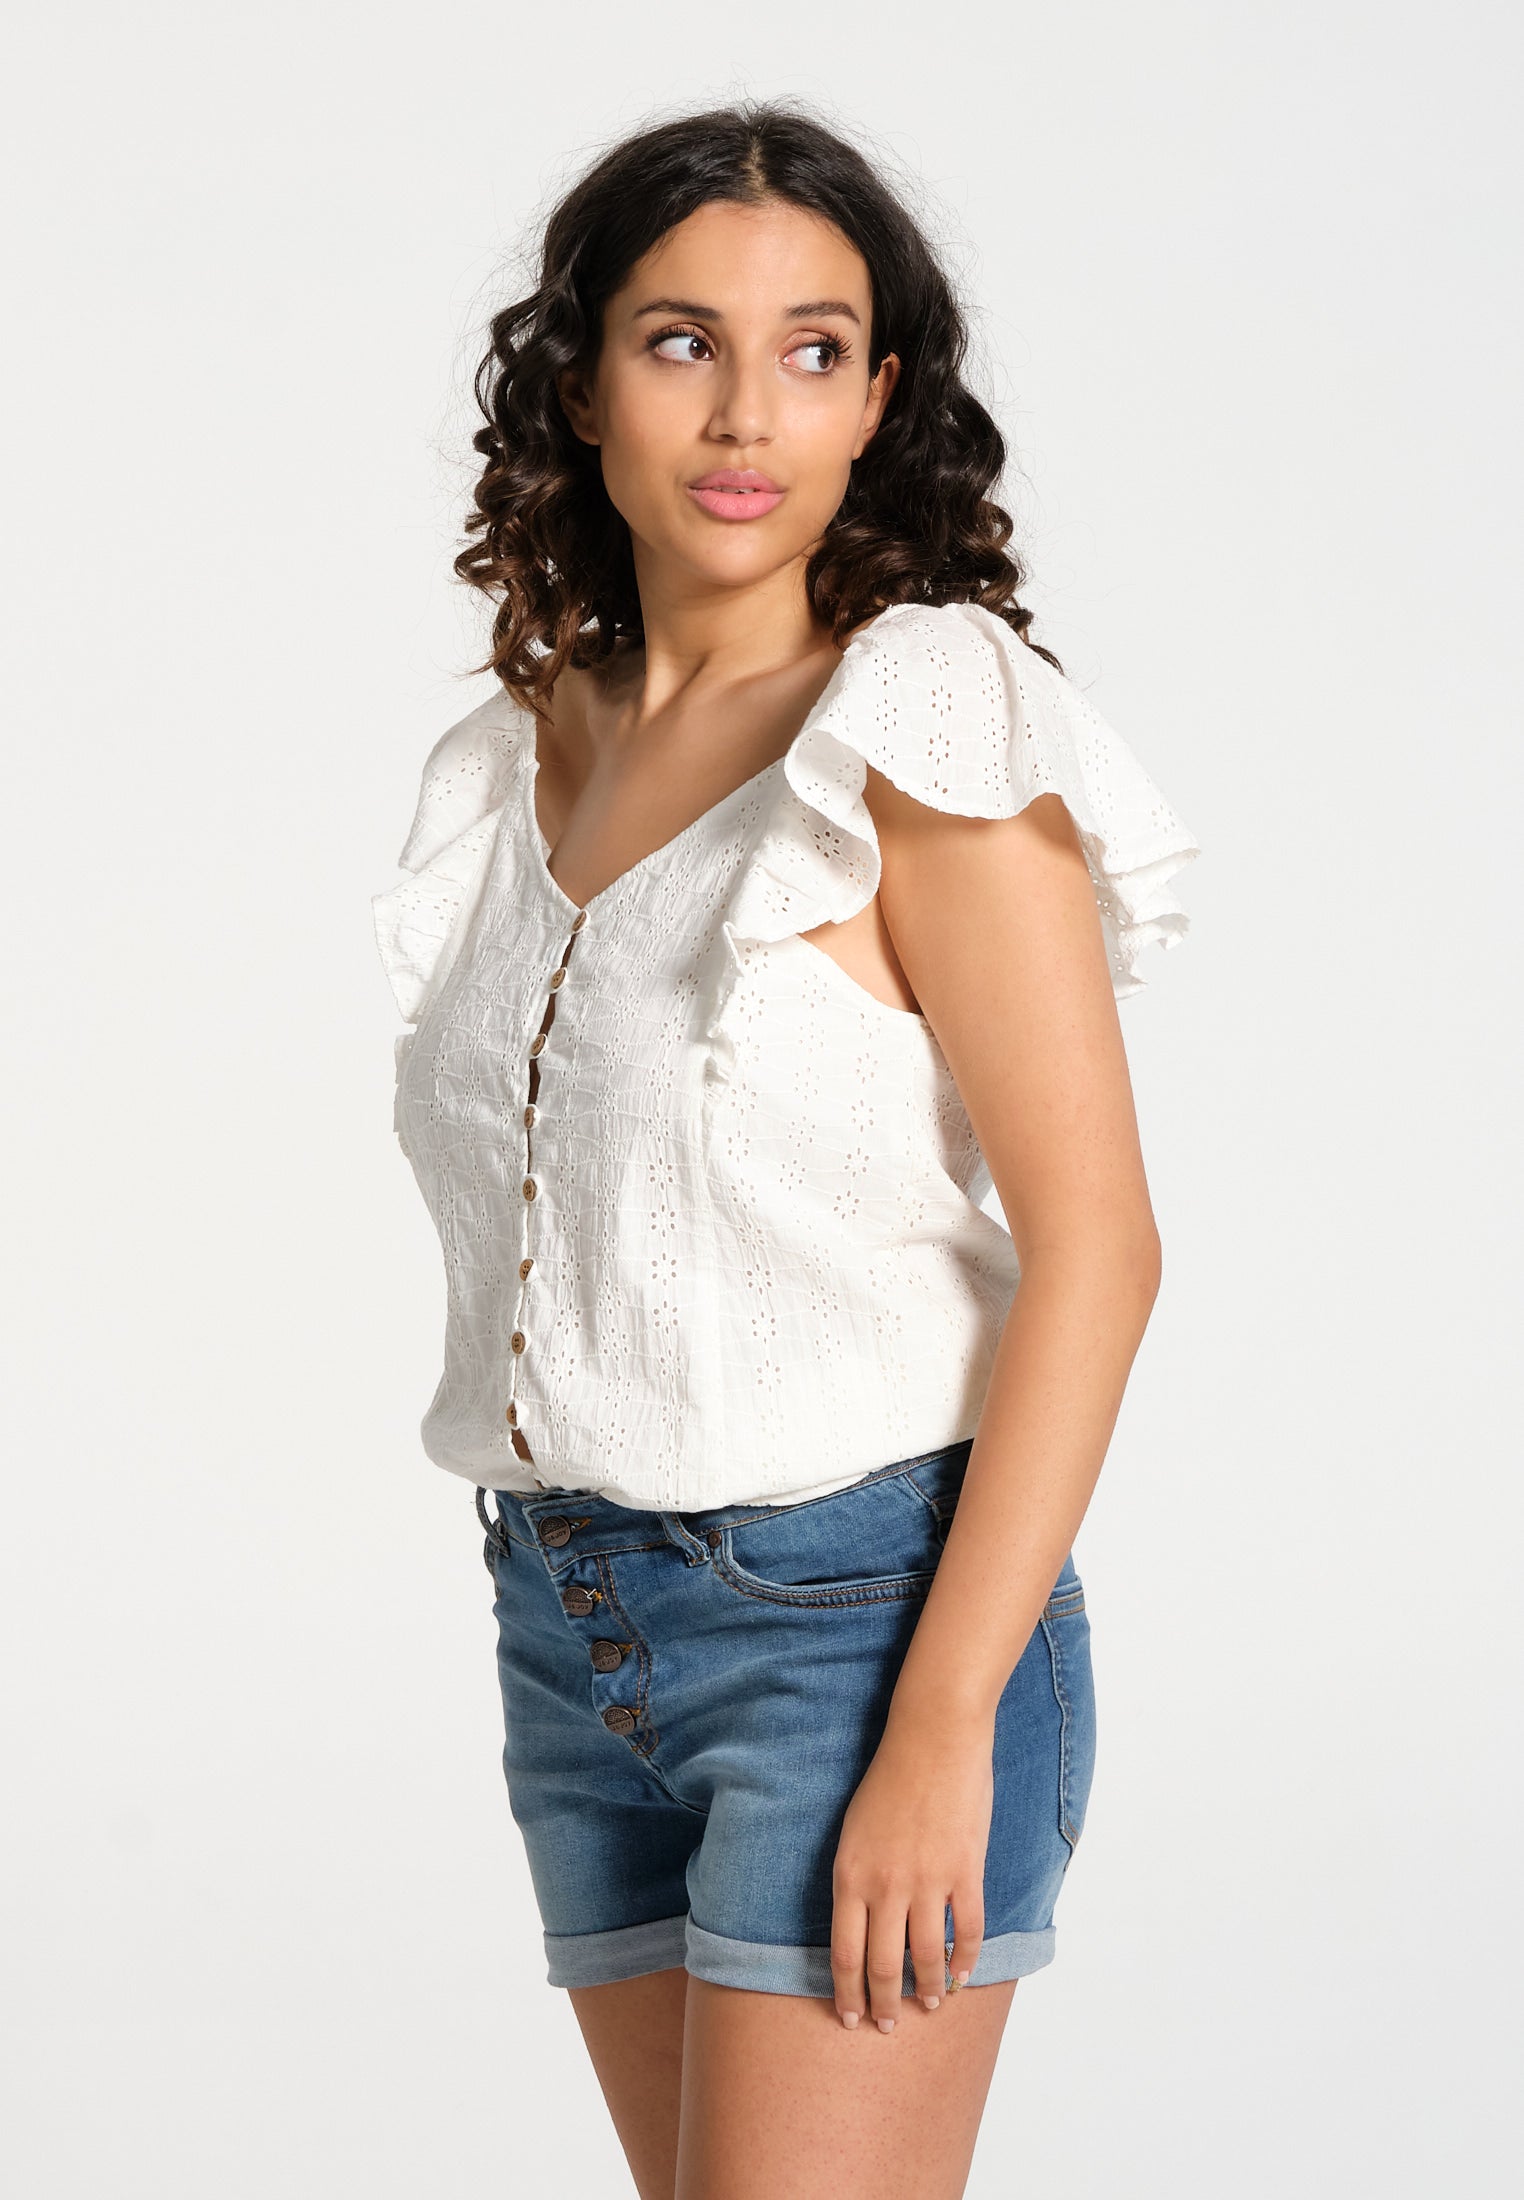 Top Femme 04 White English Embroidery | J&JOY. featured